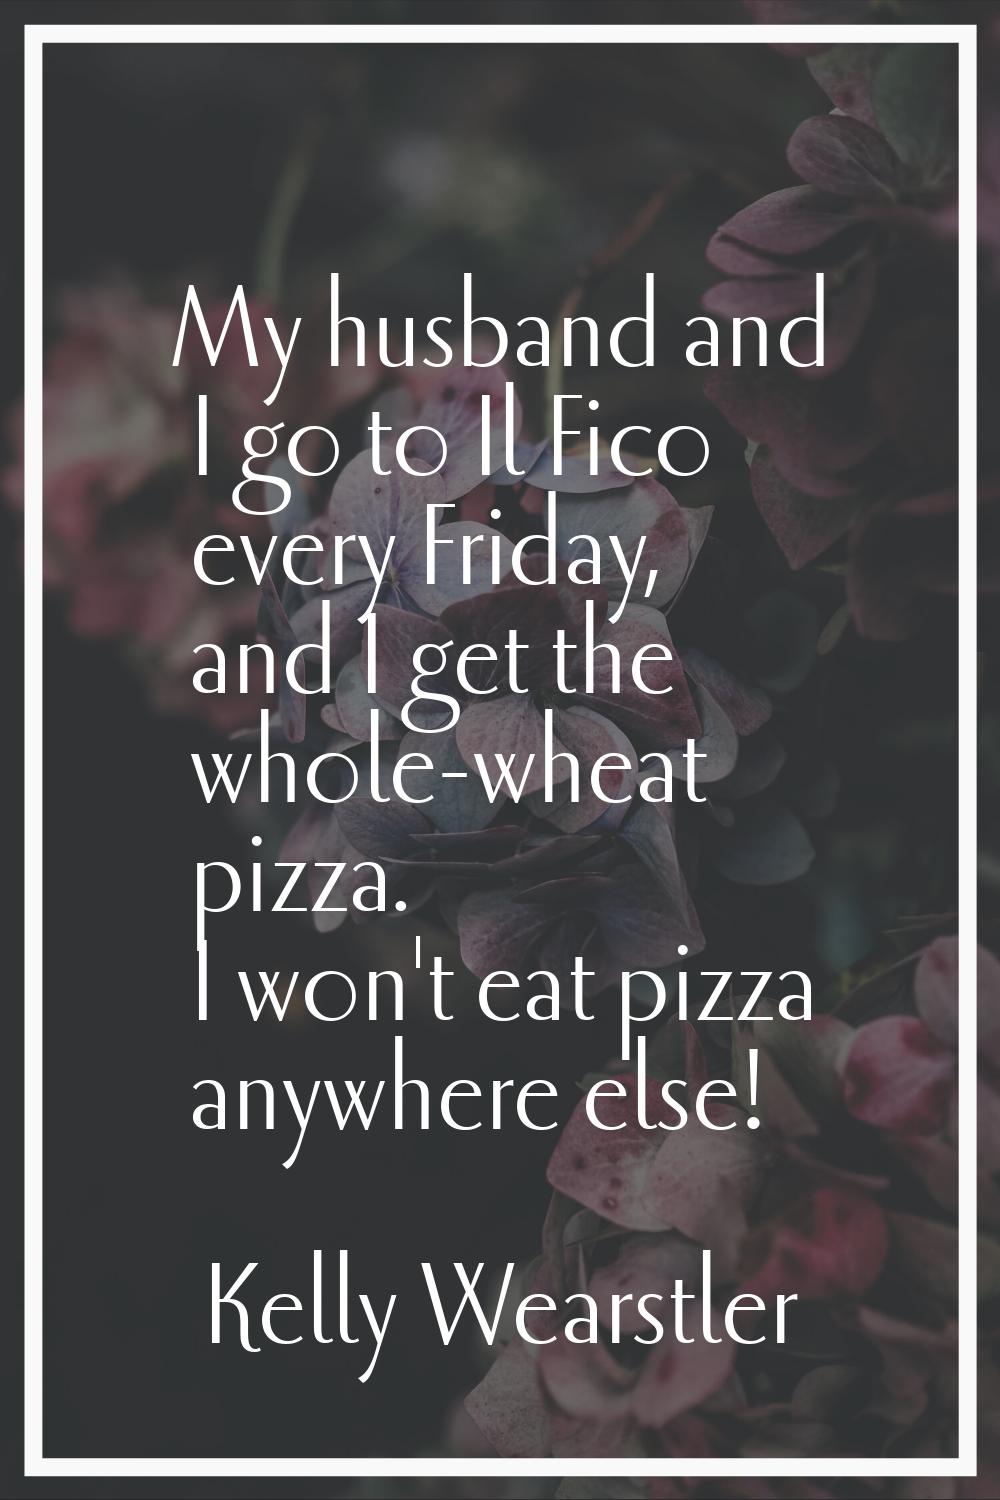 My husband and I go to Il Fico every Friday, and I get the whole-wheat pizza. I won't eat pizza any